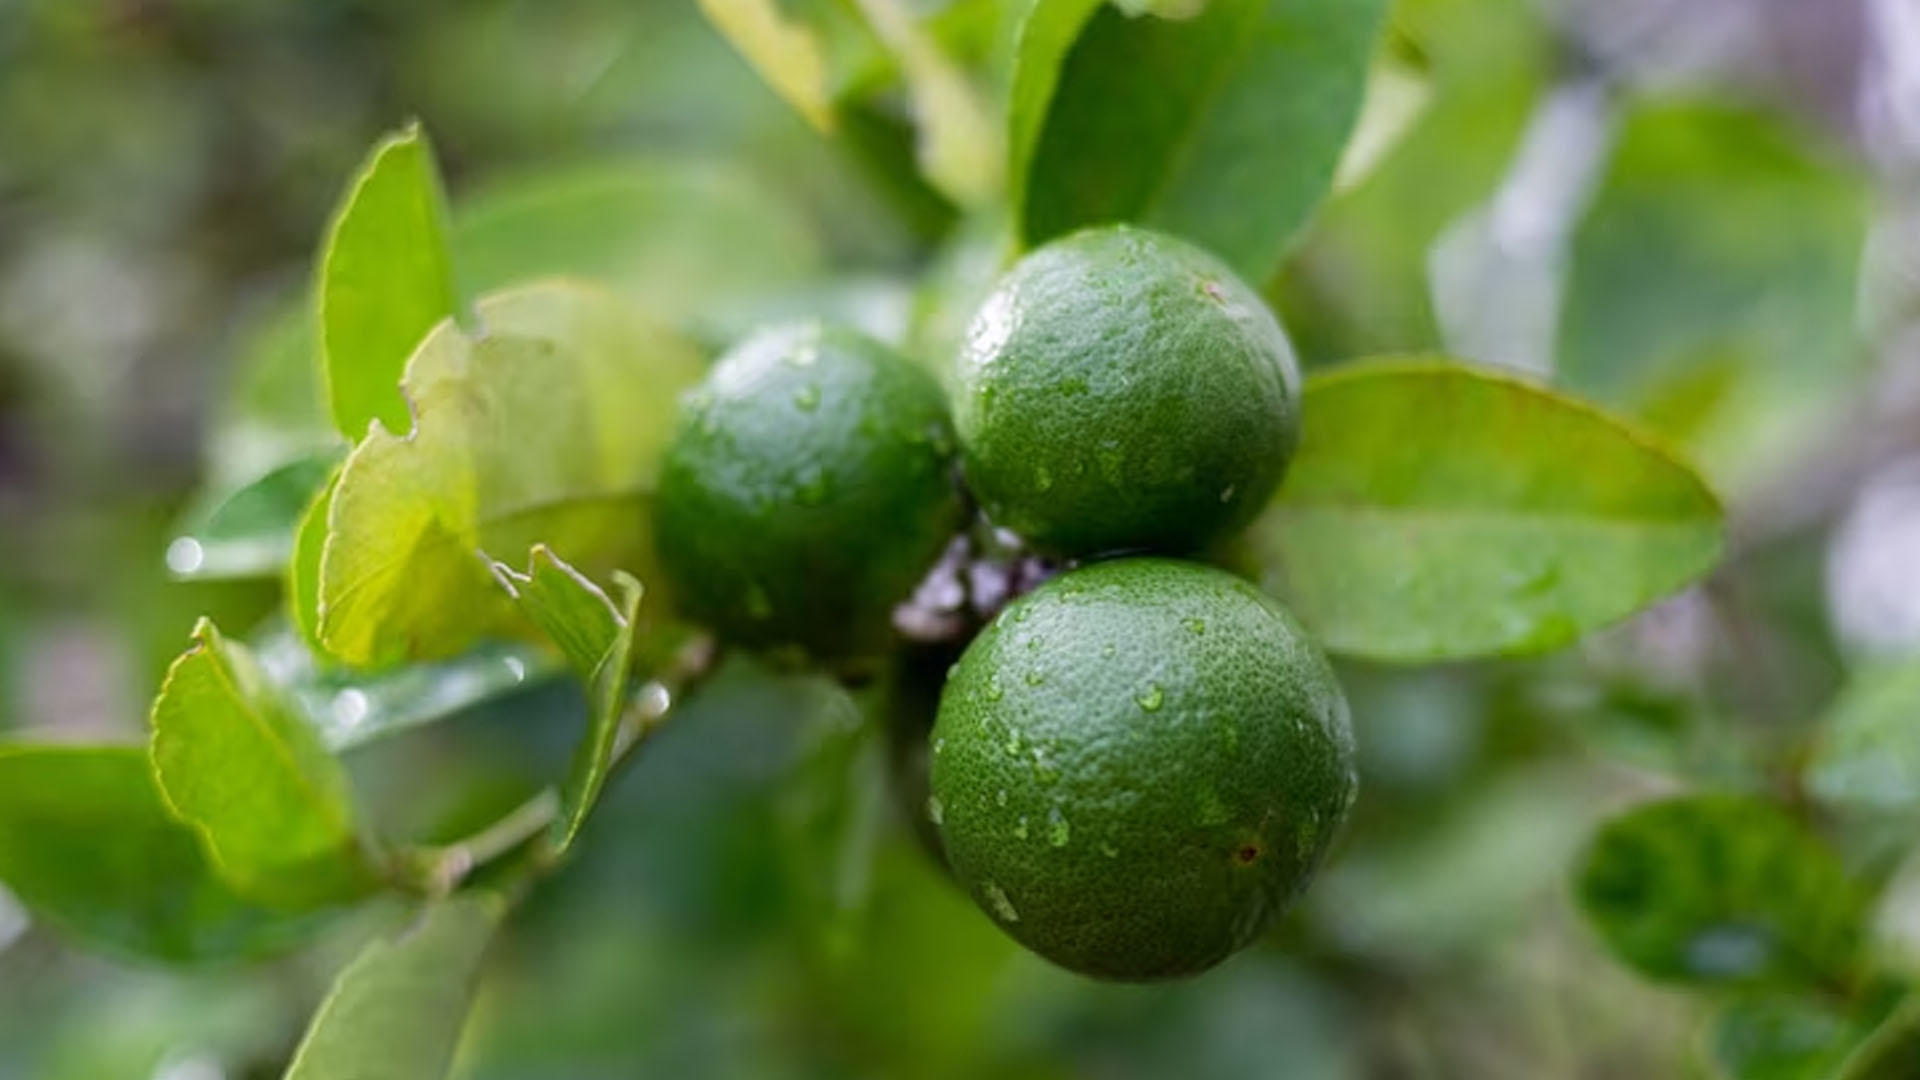 What Are The Health Benefits of Bergamot?